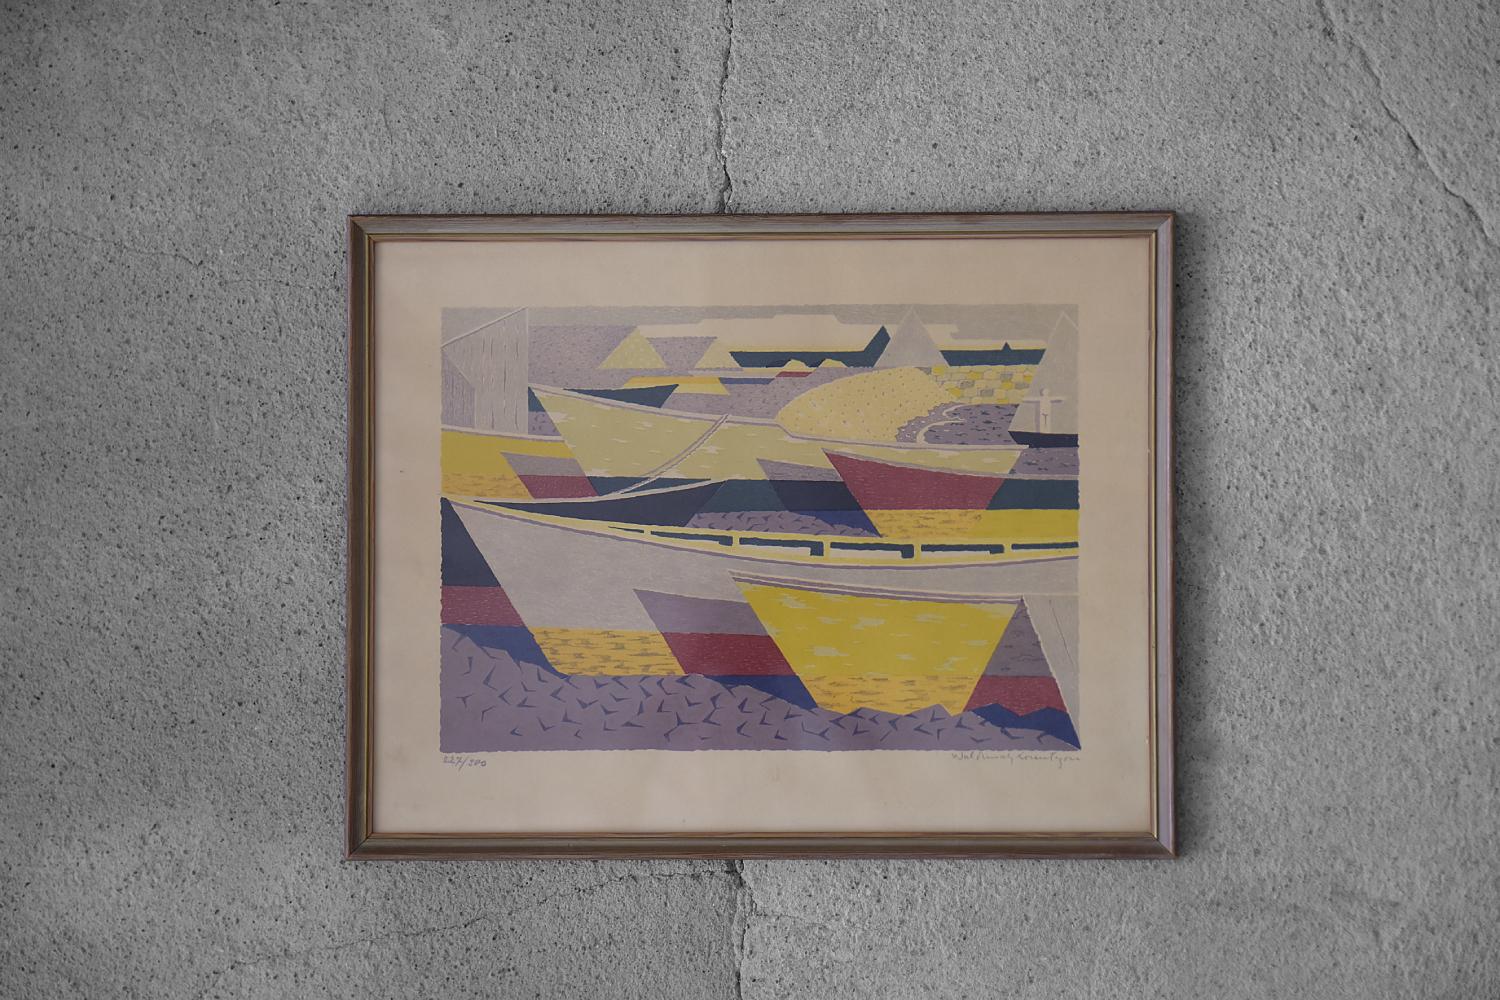 Waldemar Lorentzon, Båtparad, 1953
Color lithography
Number 227/300
Work with the artist's signature and individual number (pencil)
Working dimensions 40/52
This work is framed

Waldemar Lorentzon was born in 1899 and died in 1984. He was a